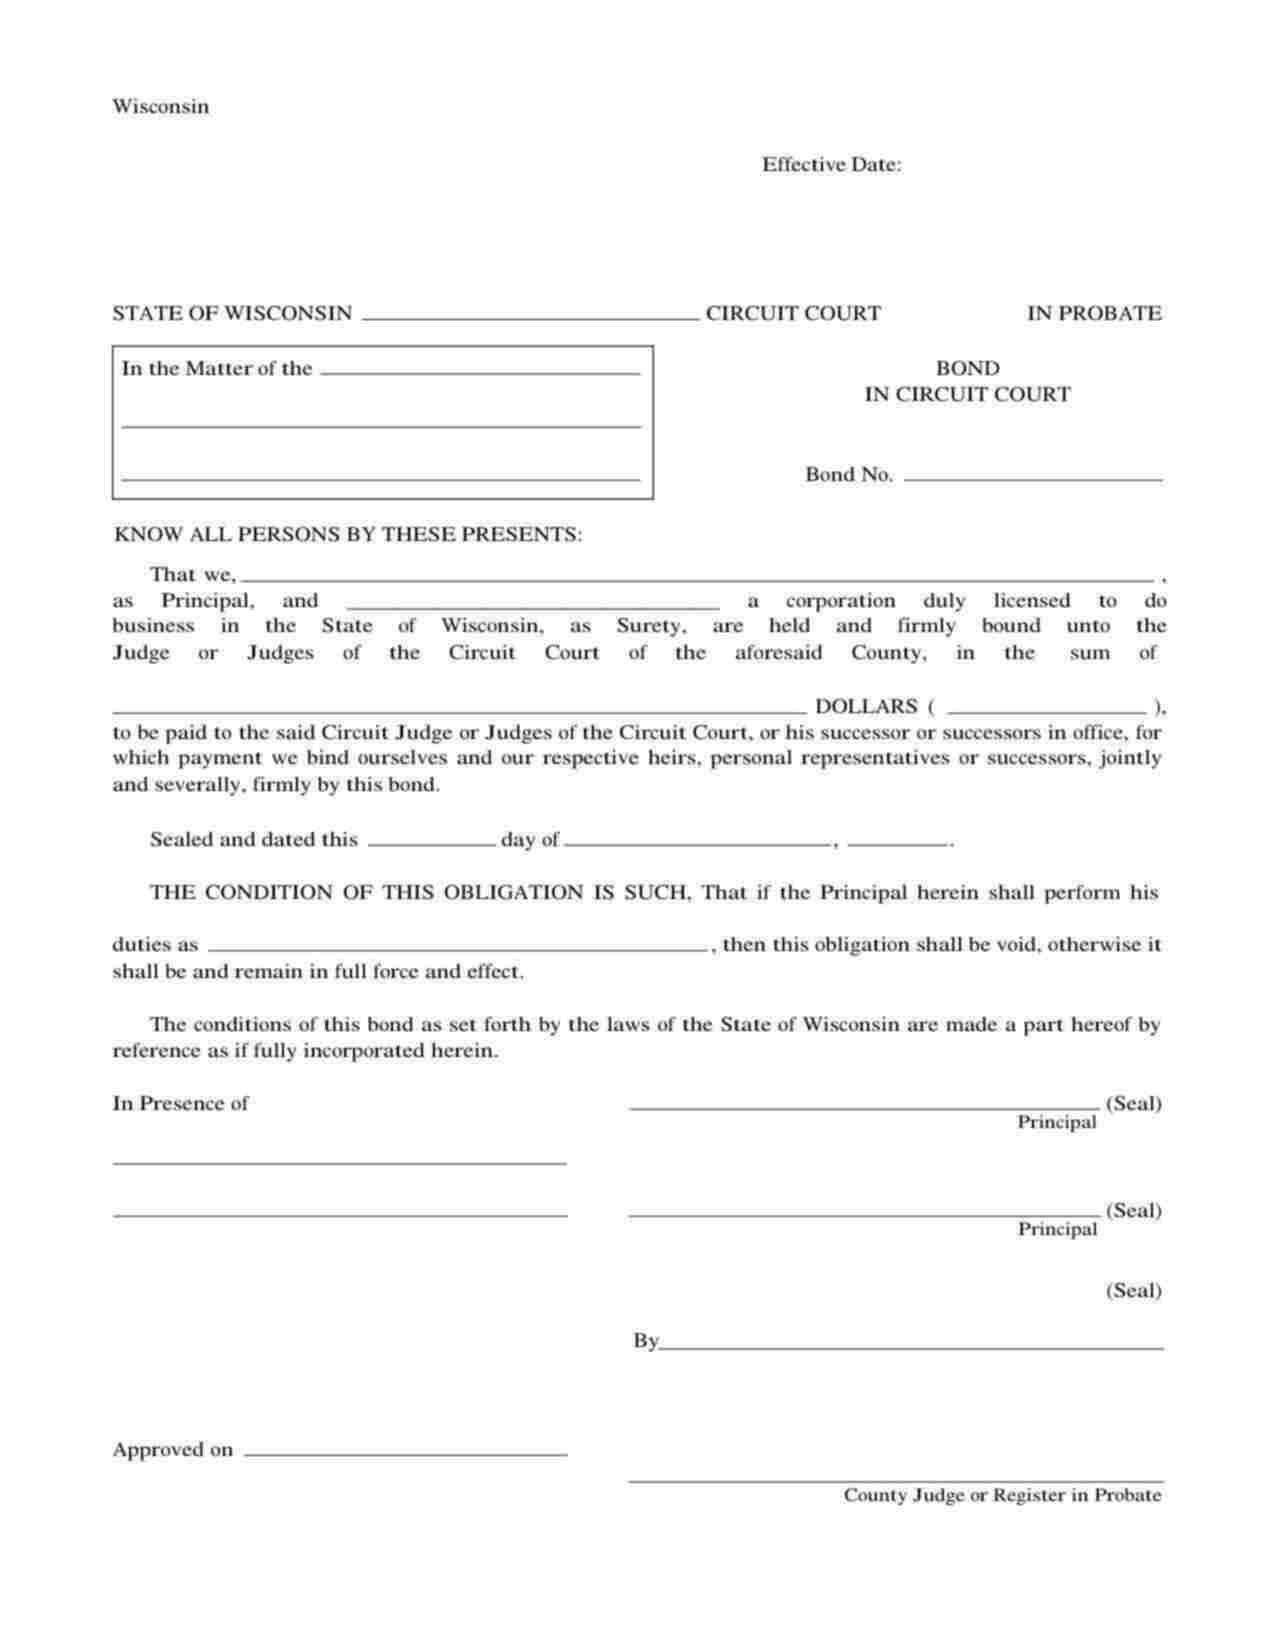 Wisconsin Probate Administrator, Executor, Conservator, or Guardian Bond Form